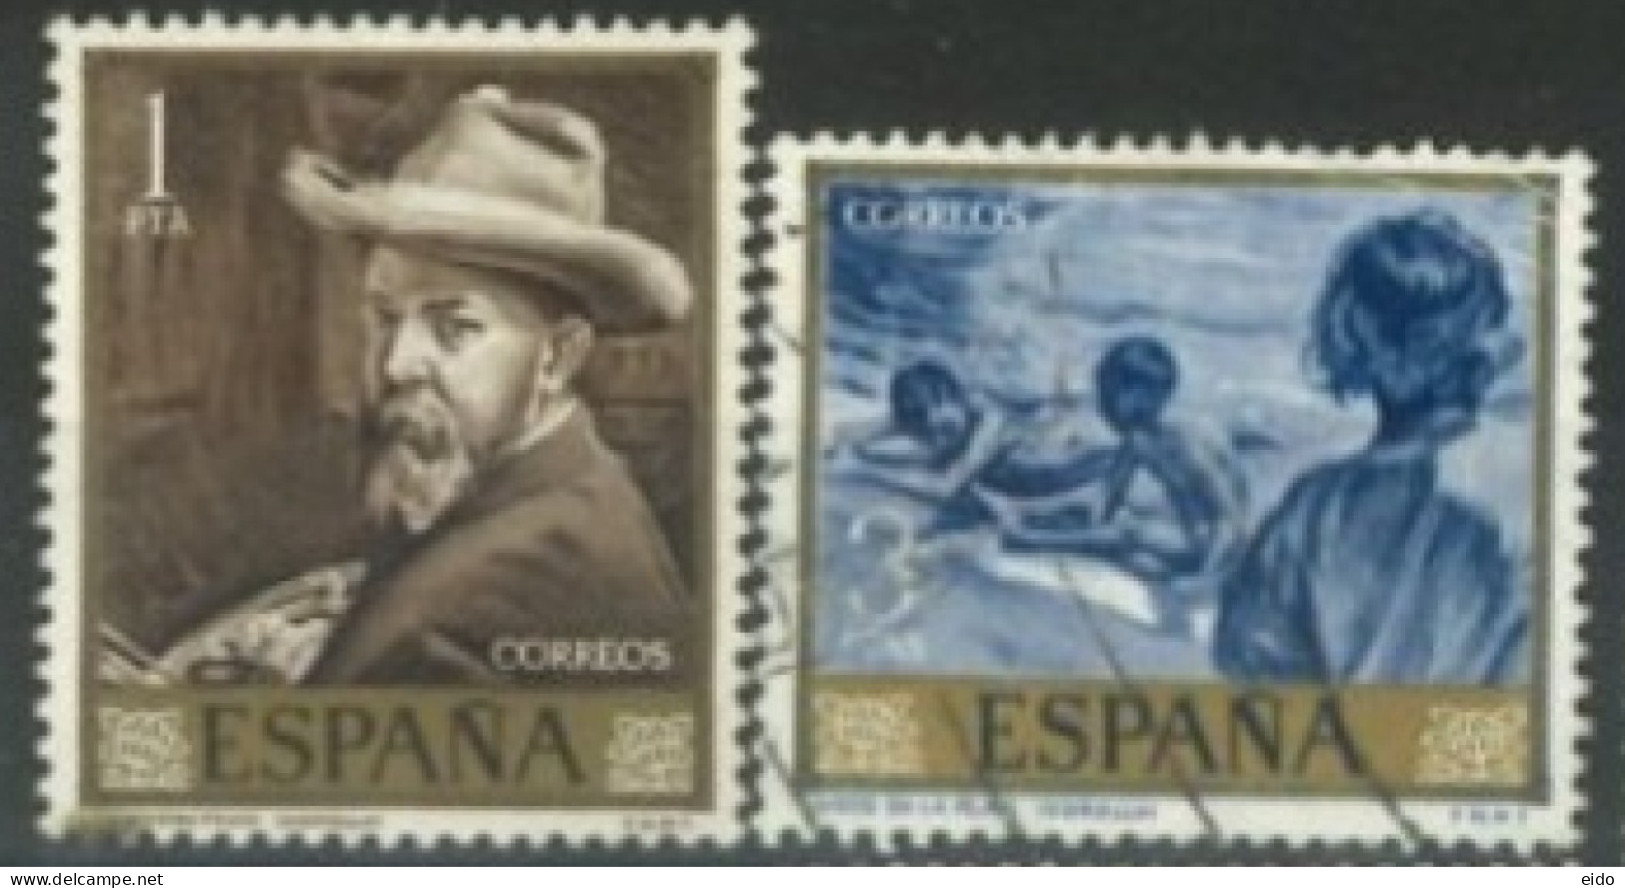 SPAIN, 1964, SOROLLA PAINTINGS STAMPS SET OF 2, # 1219, & 1222, USED. - Oblitérés